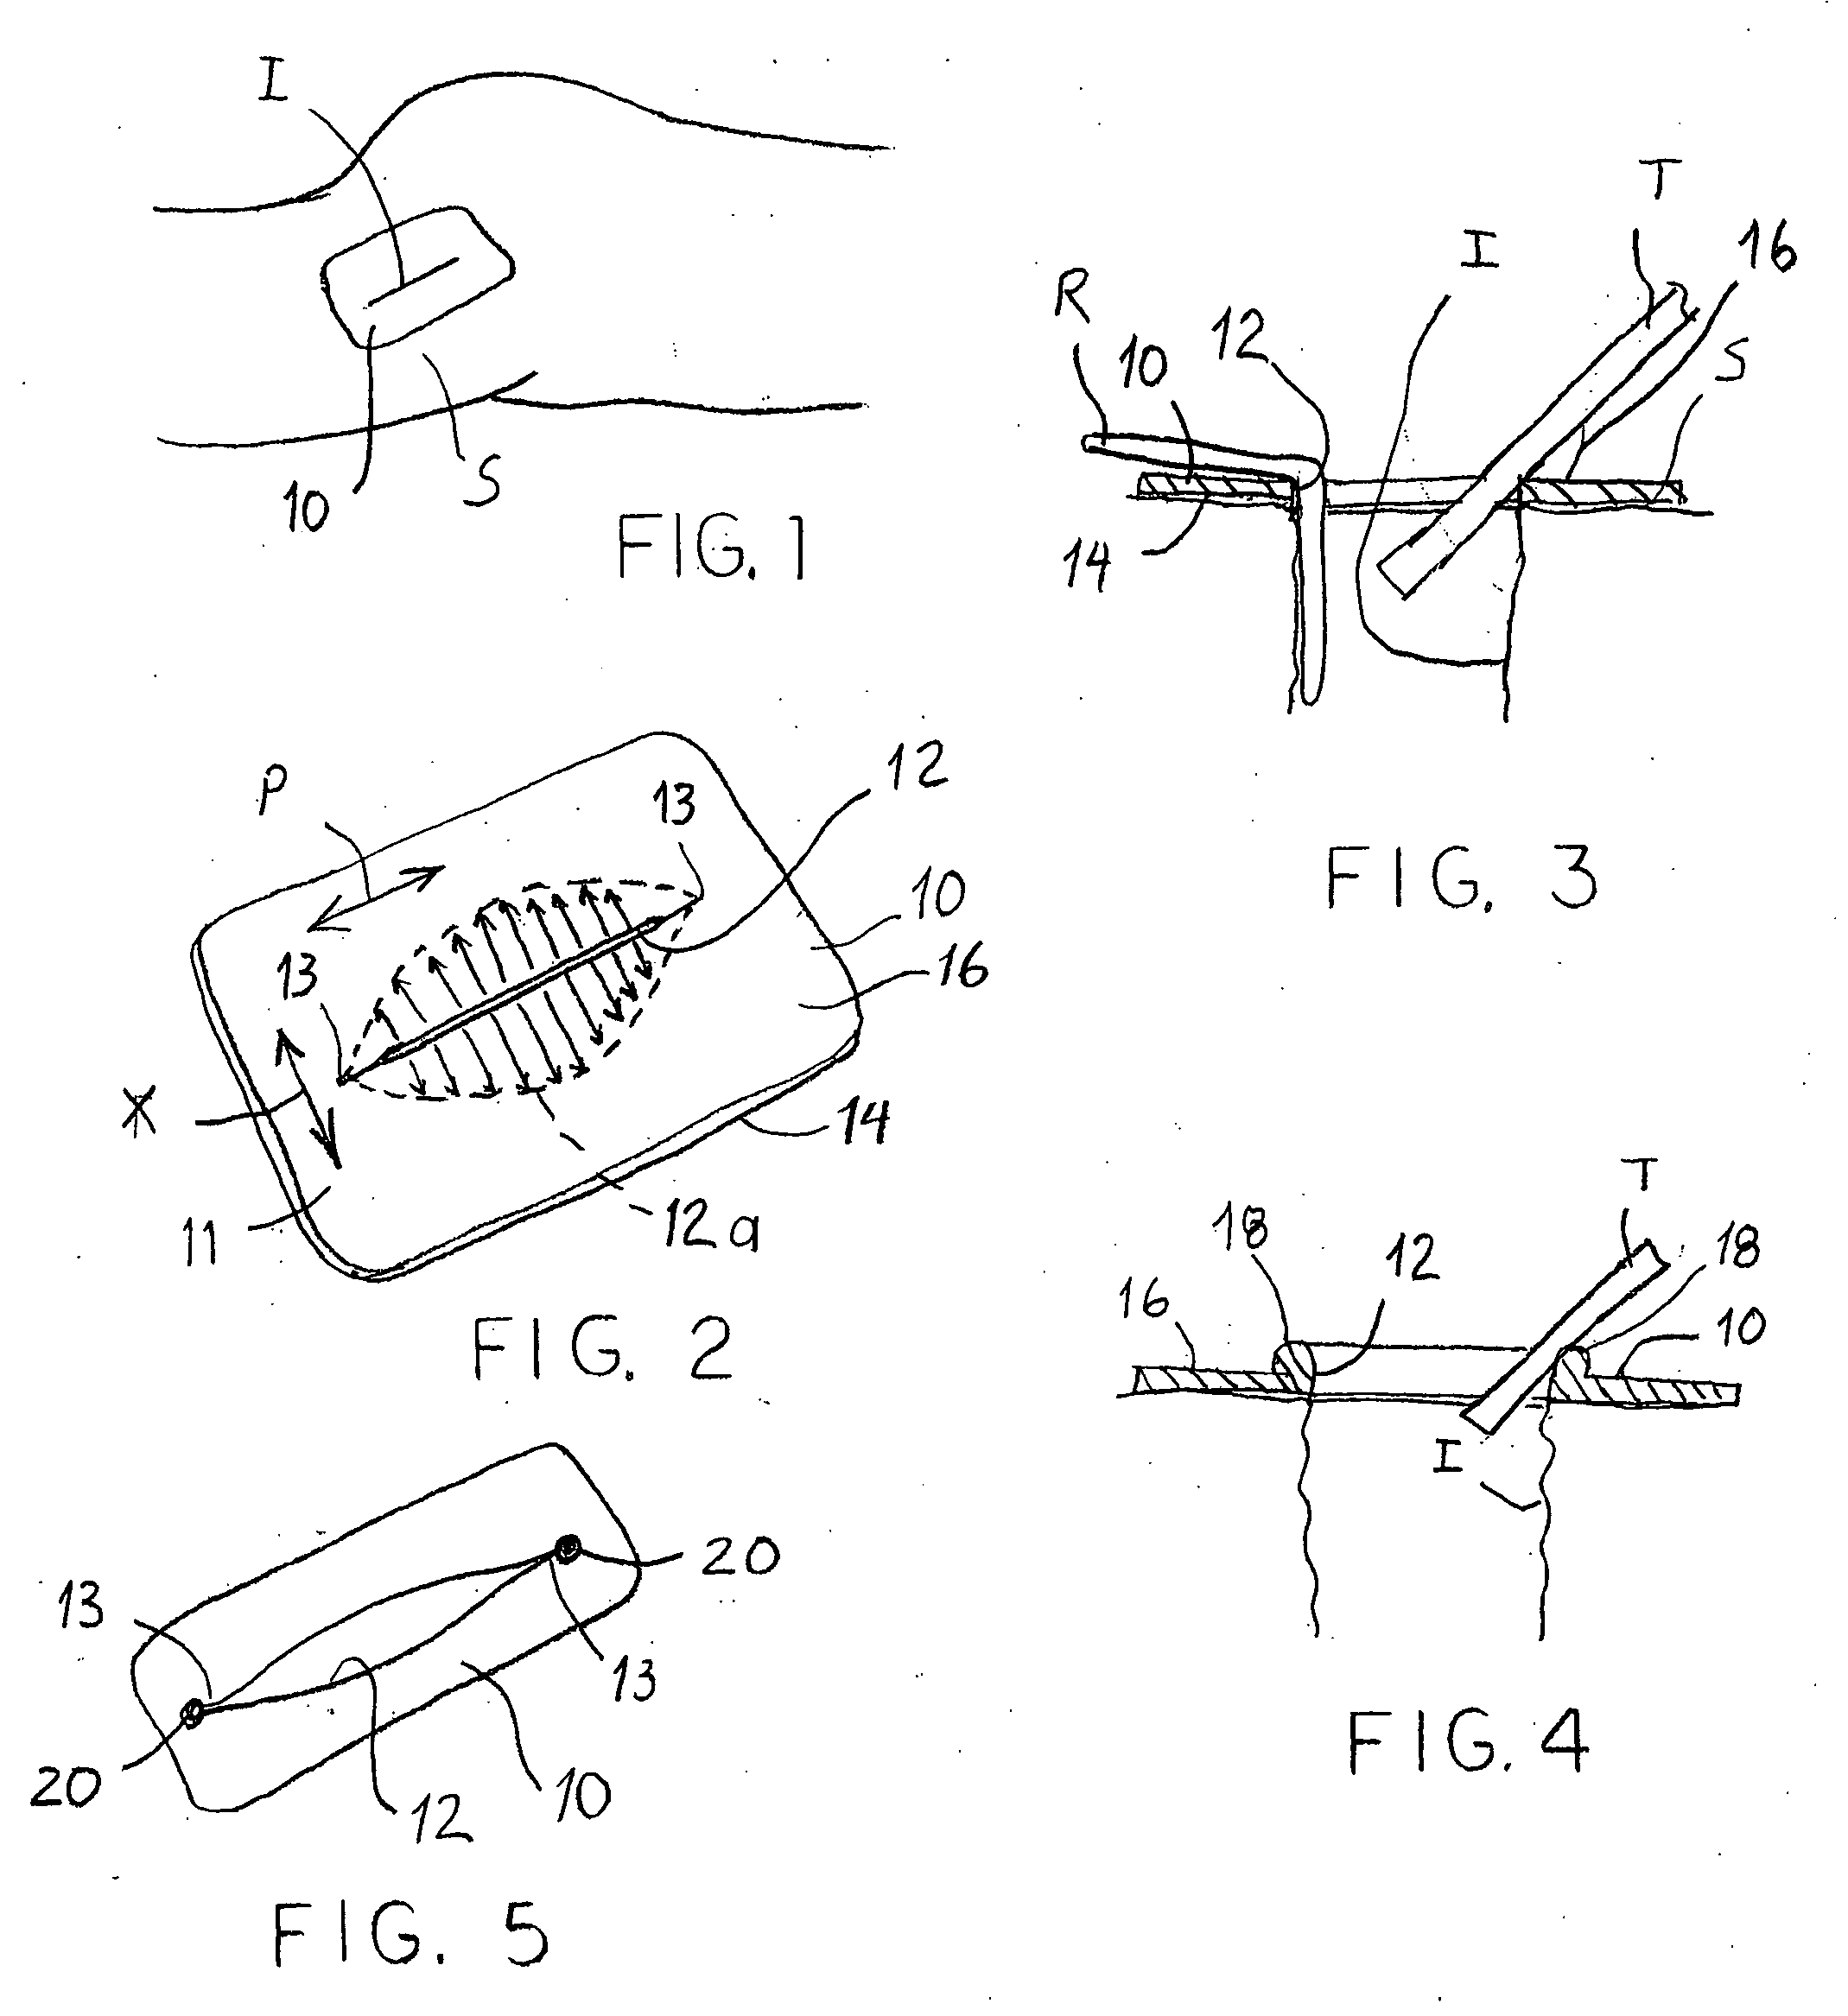 Devices and methods for protecting tissue at a surgical site